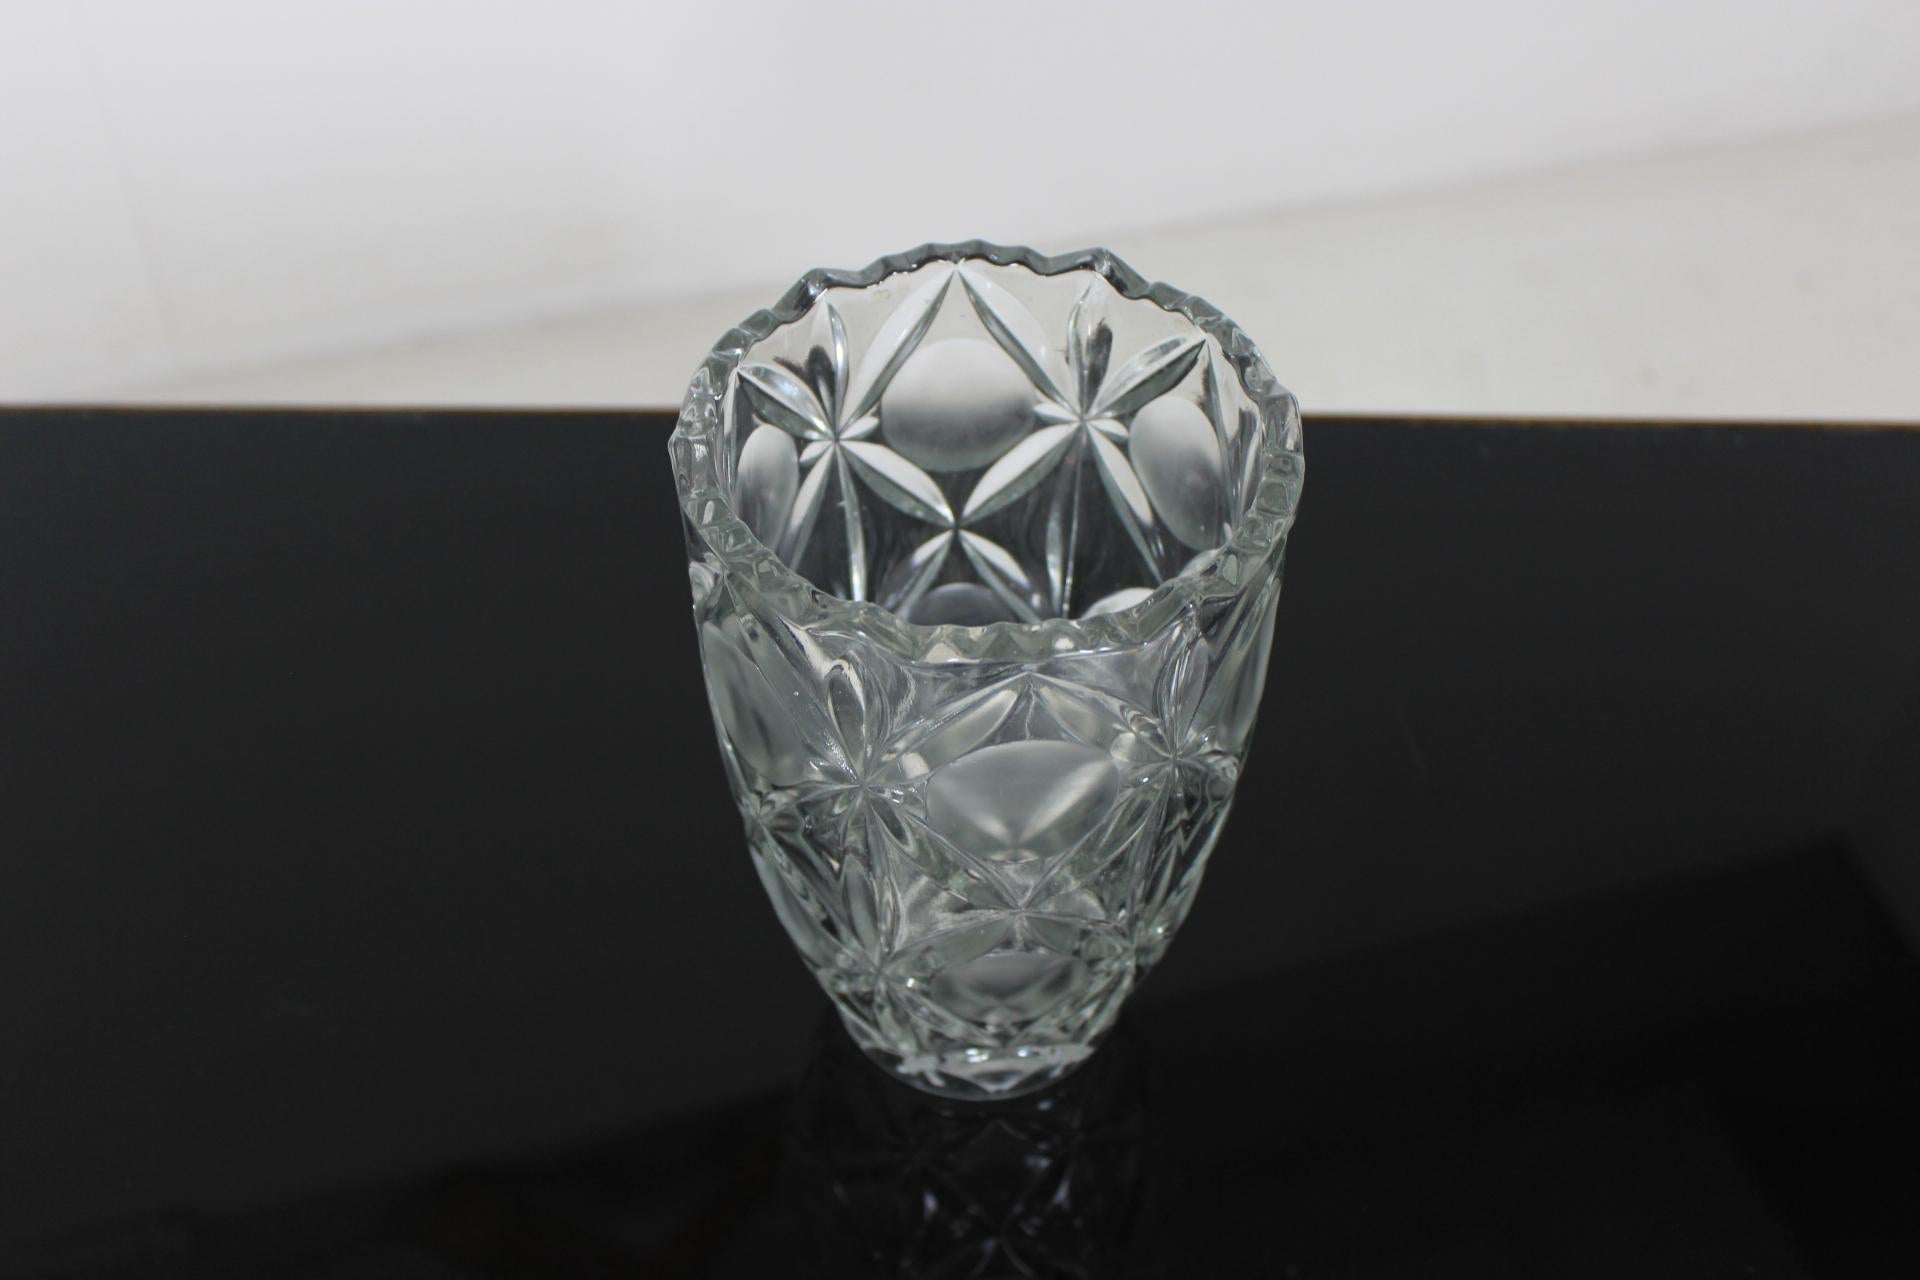 The vase made of pure, grinder glass. Made in Czechoslovakia. Original condition.